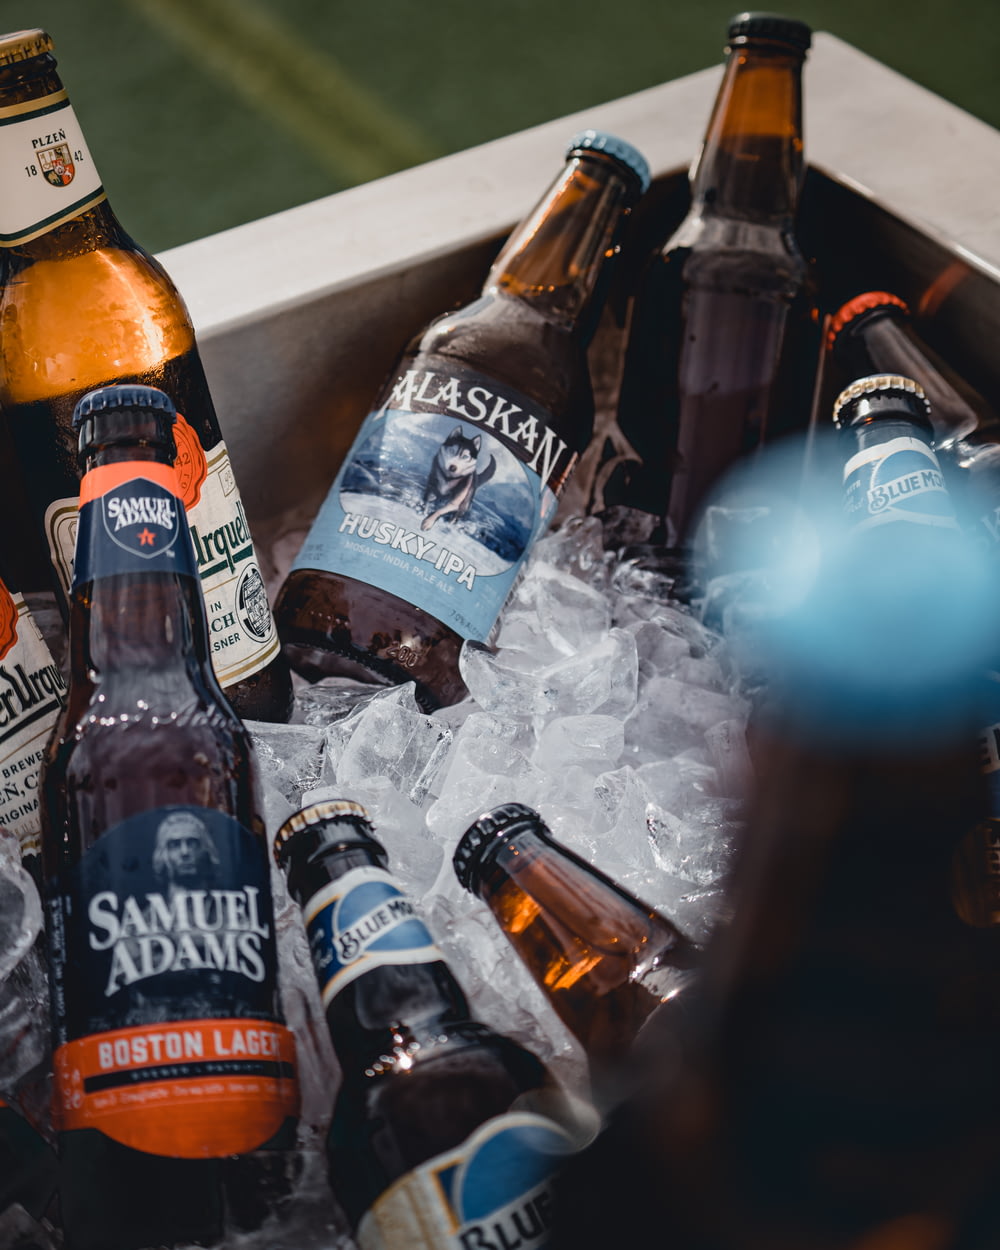 Samuel Adams beer bottles on a chest cooler with ice cubes